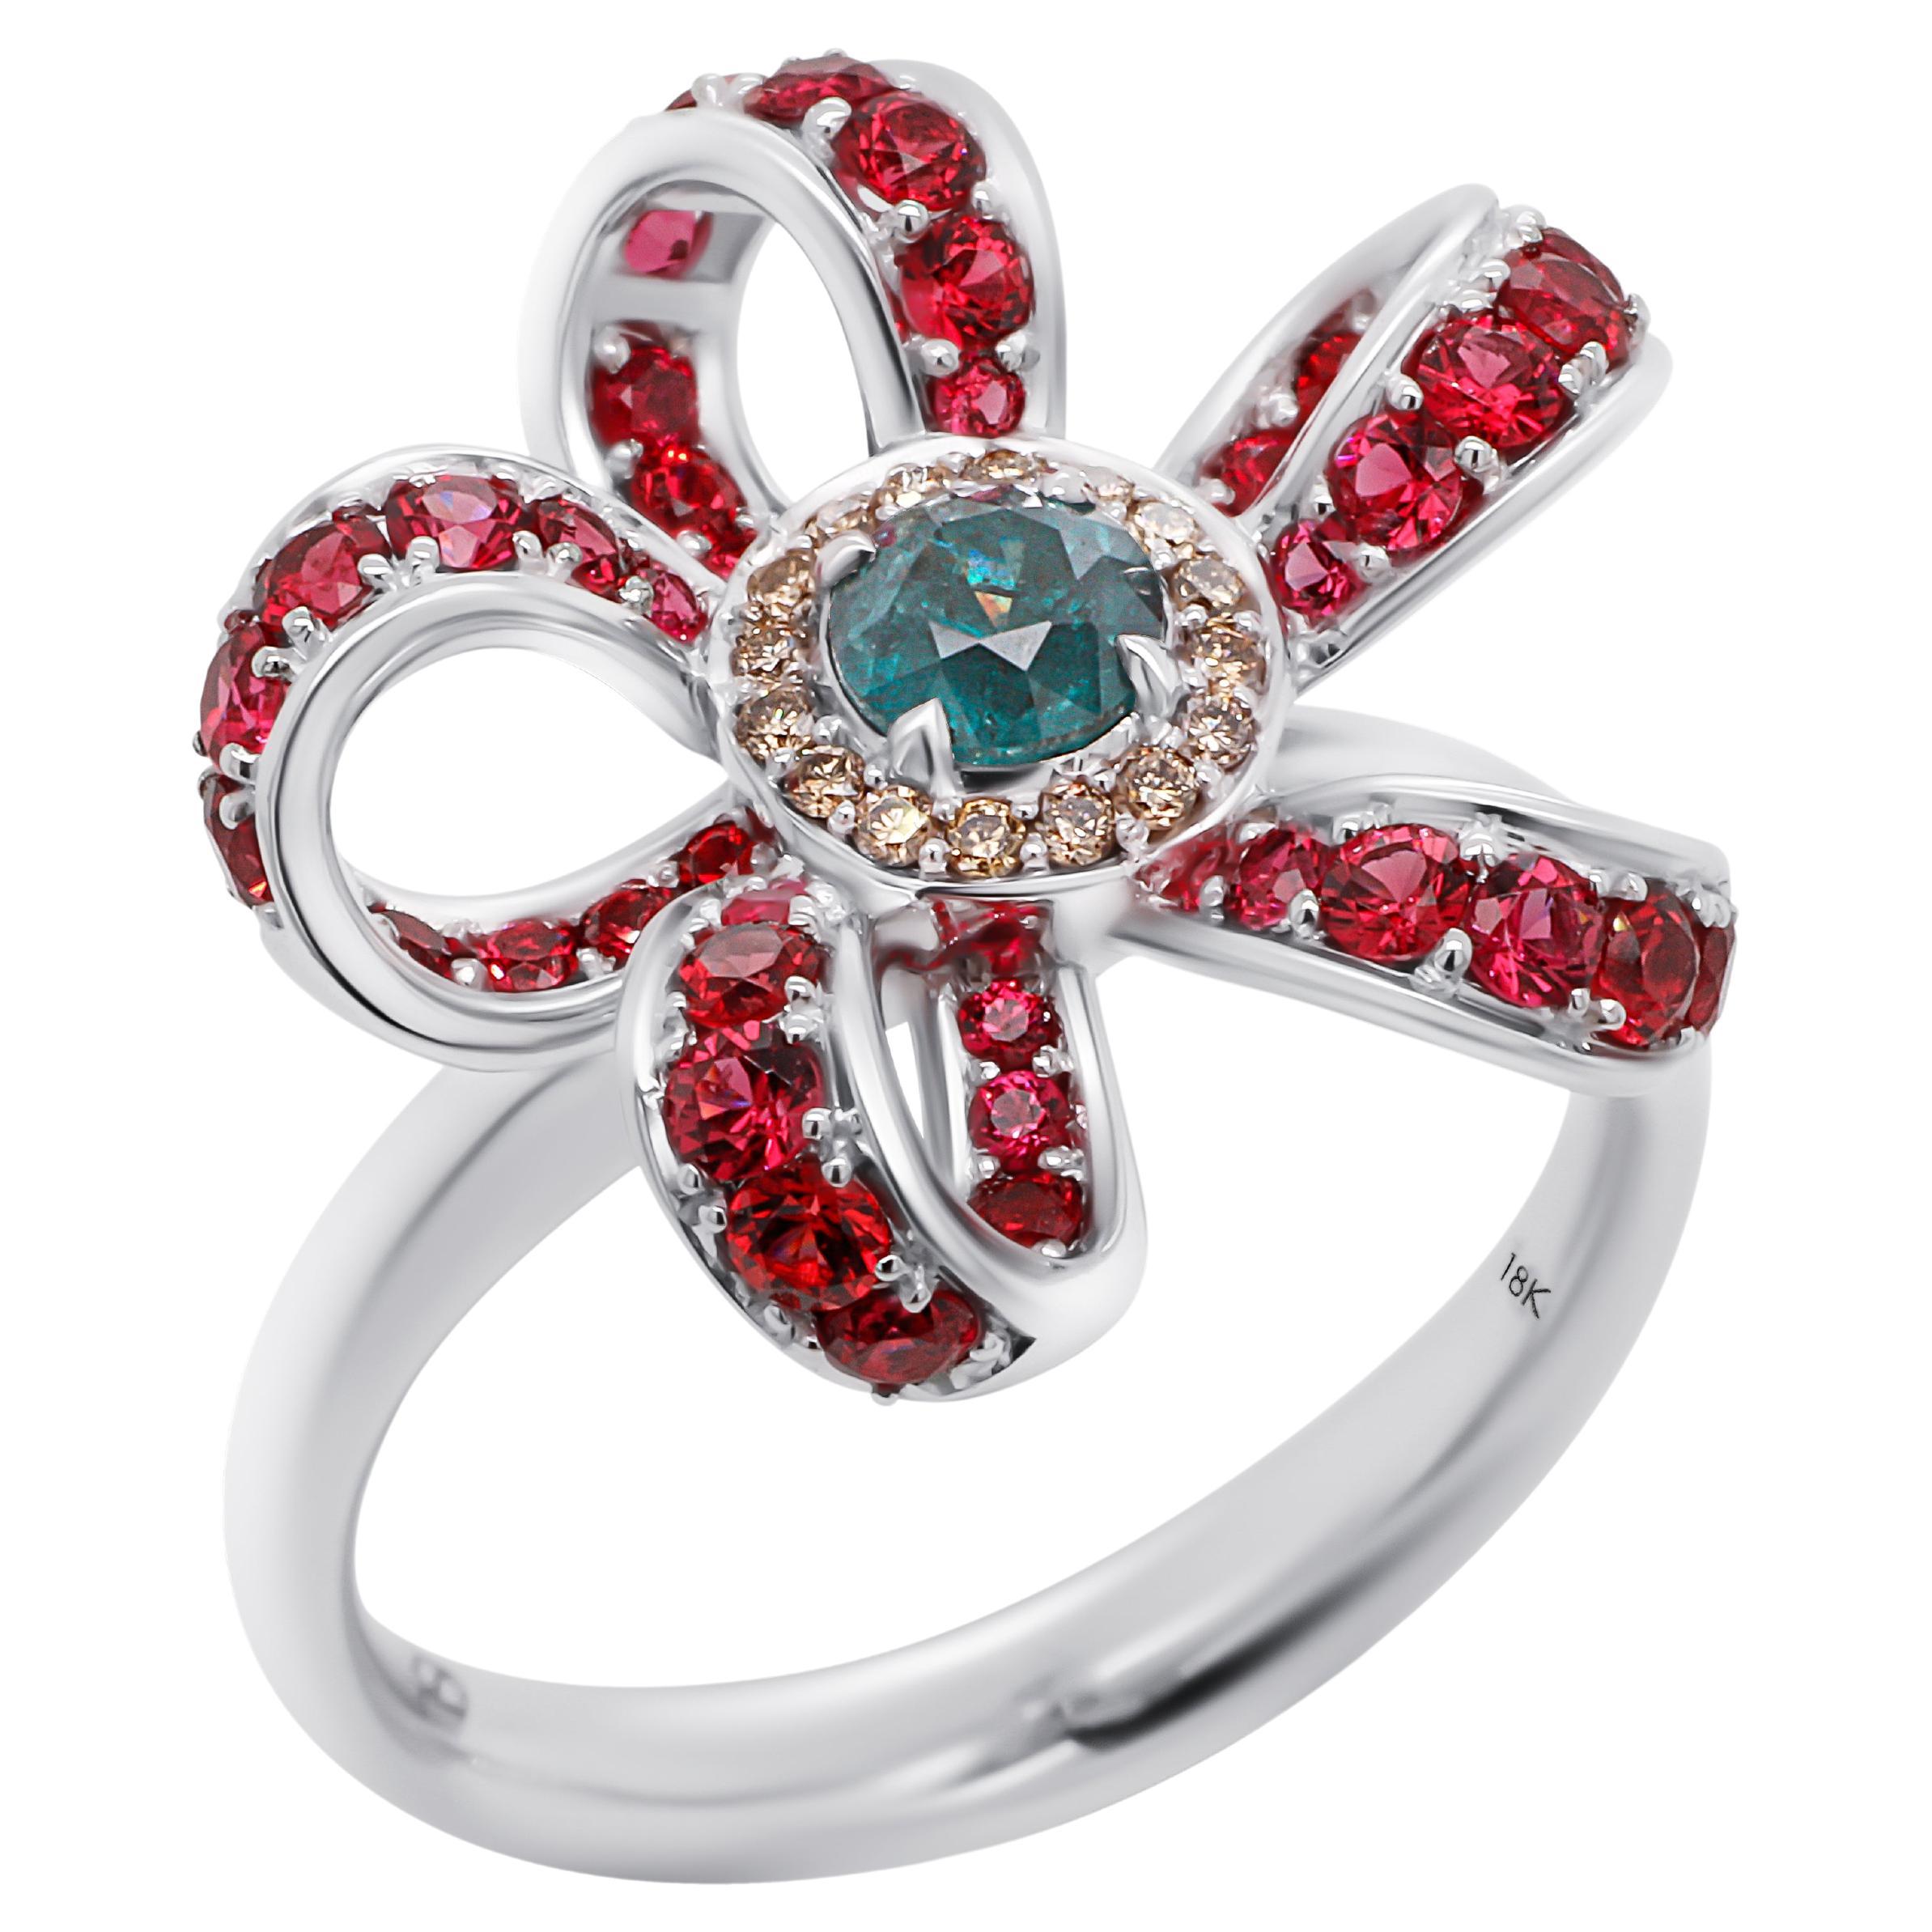 Natural Russian Alexandrite Floral 18K Gold Ring with Pink Spinels and Diamonds